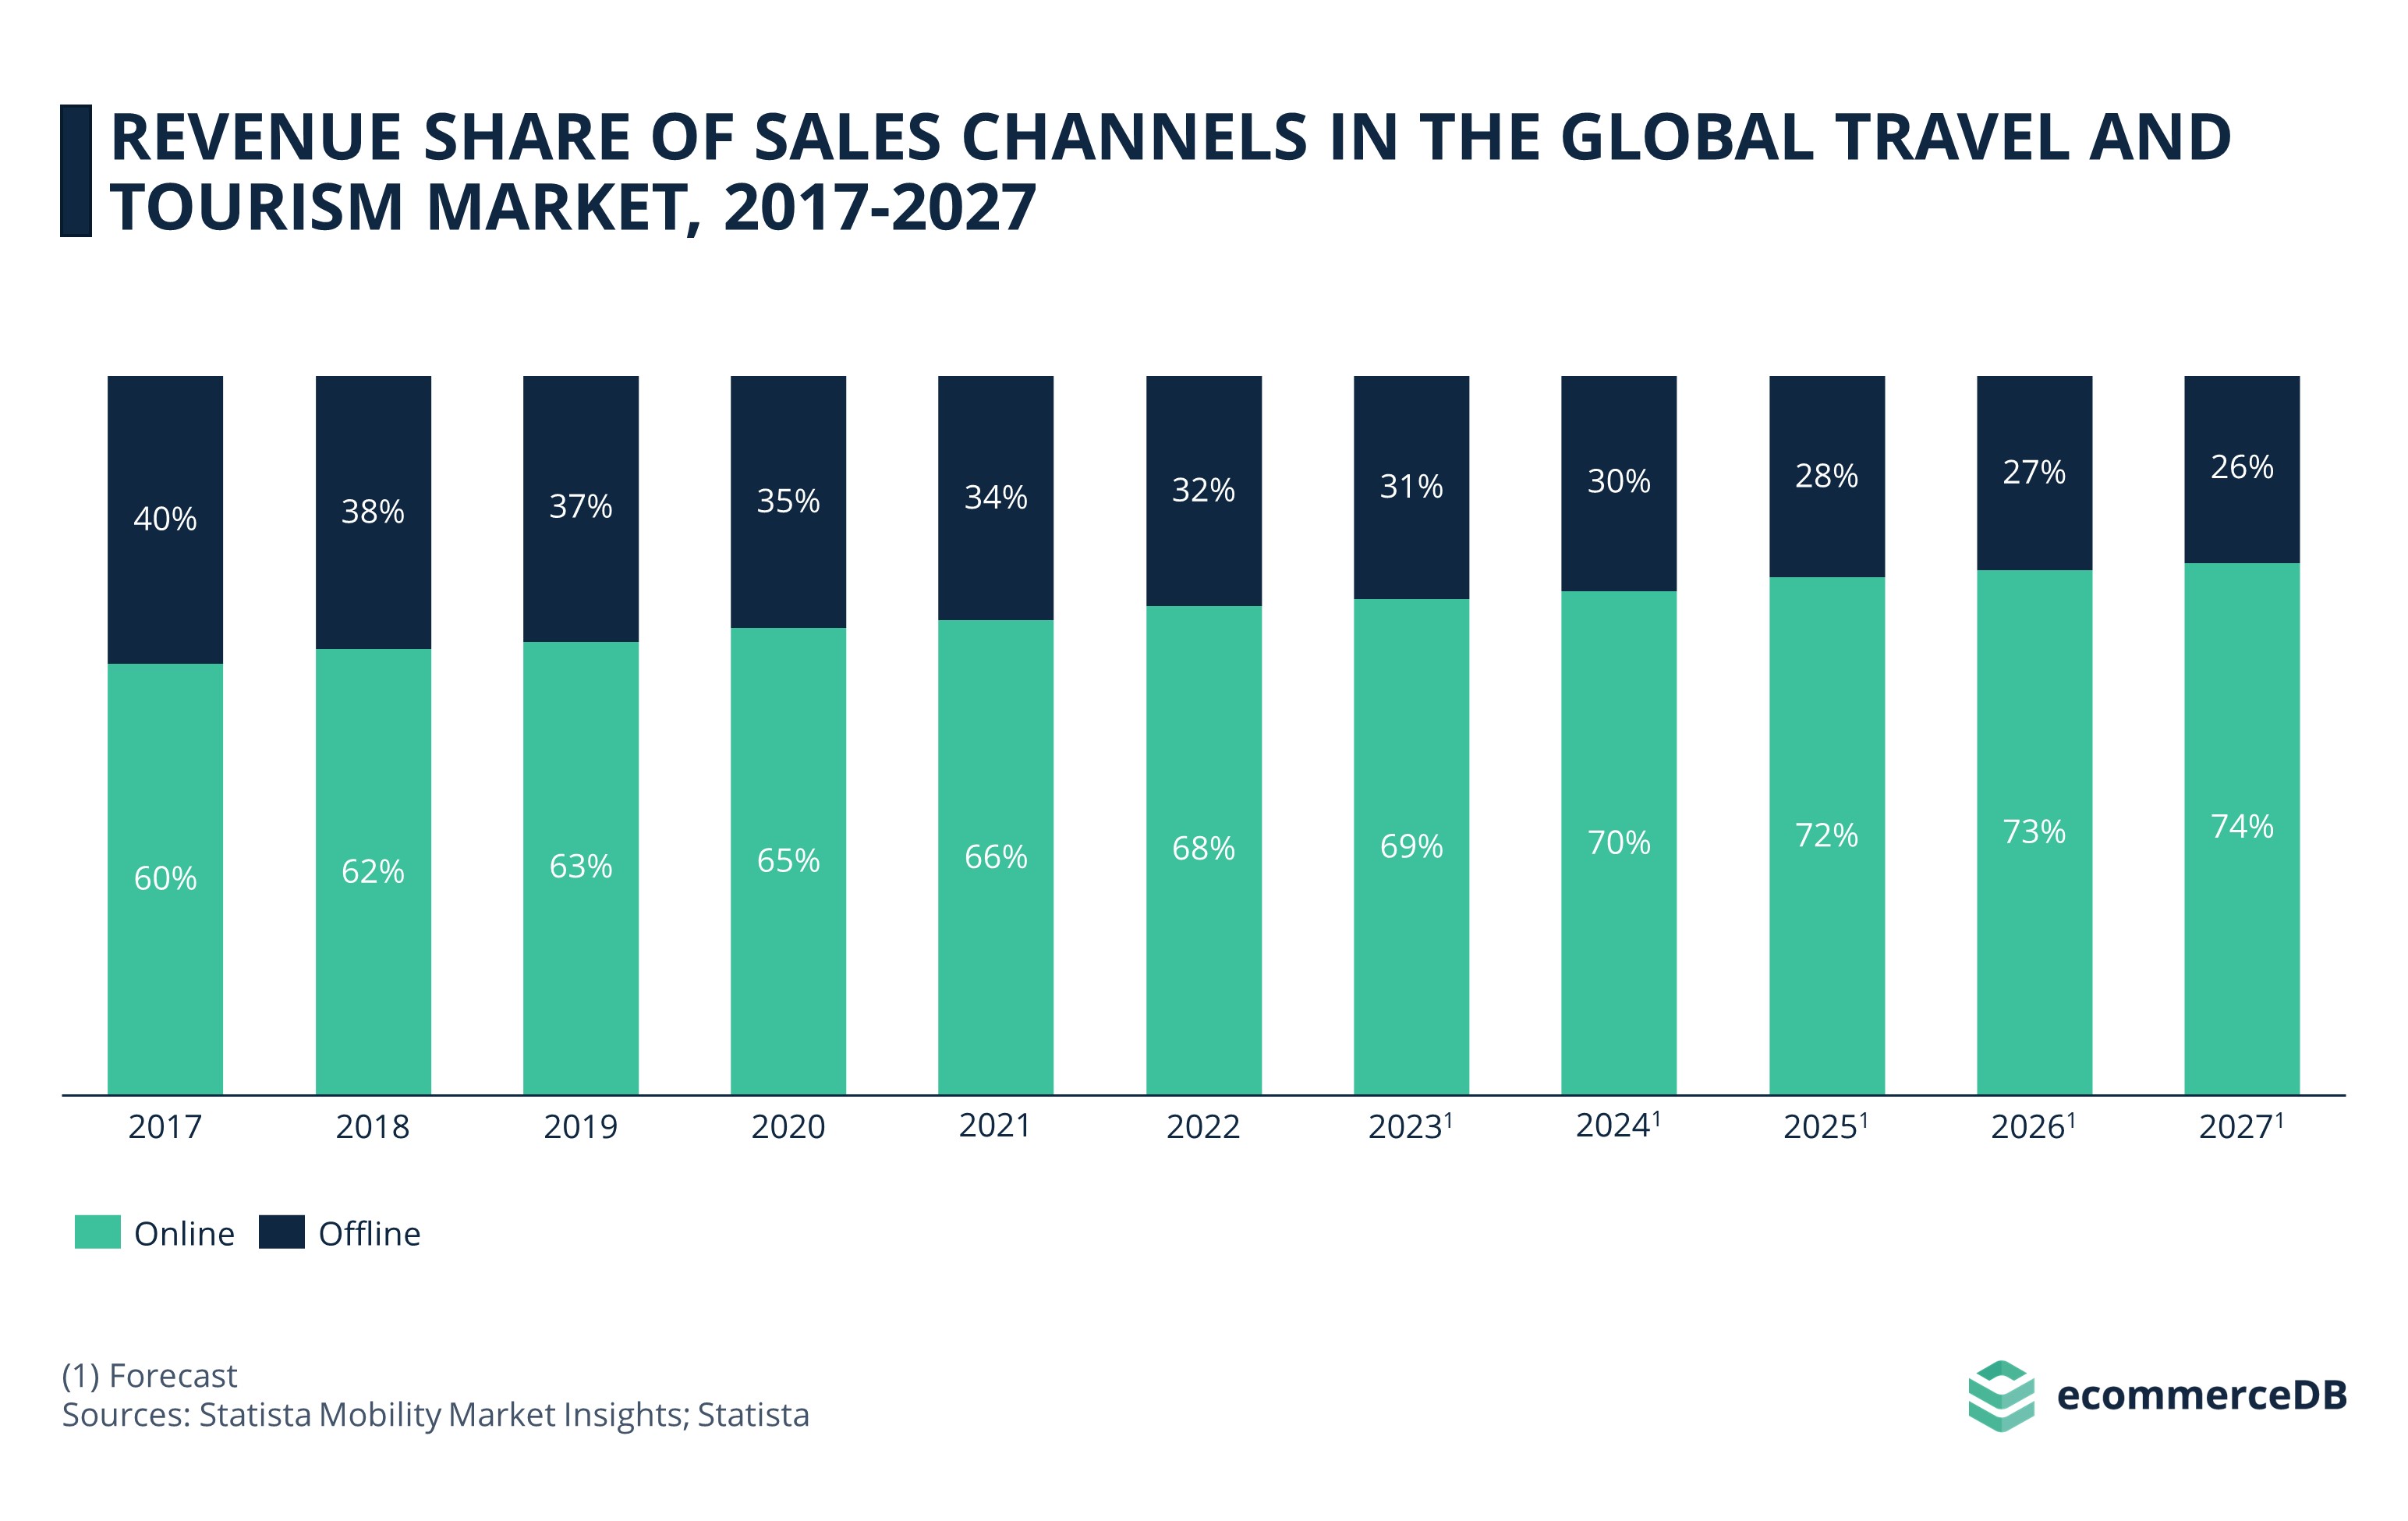 Revenue Share of Sales Channels in the Global Travel and Tourism Market, 2017-2027